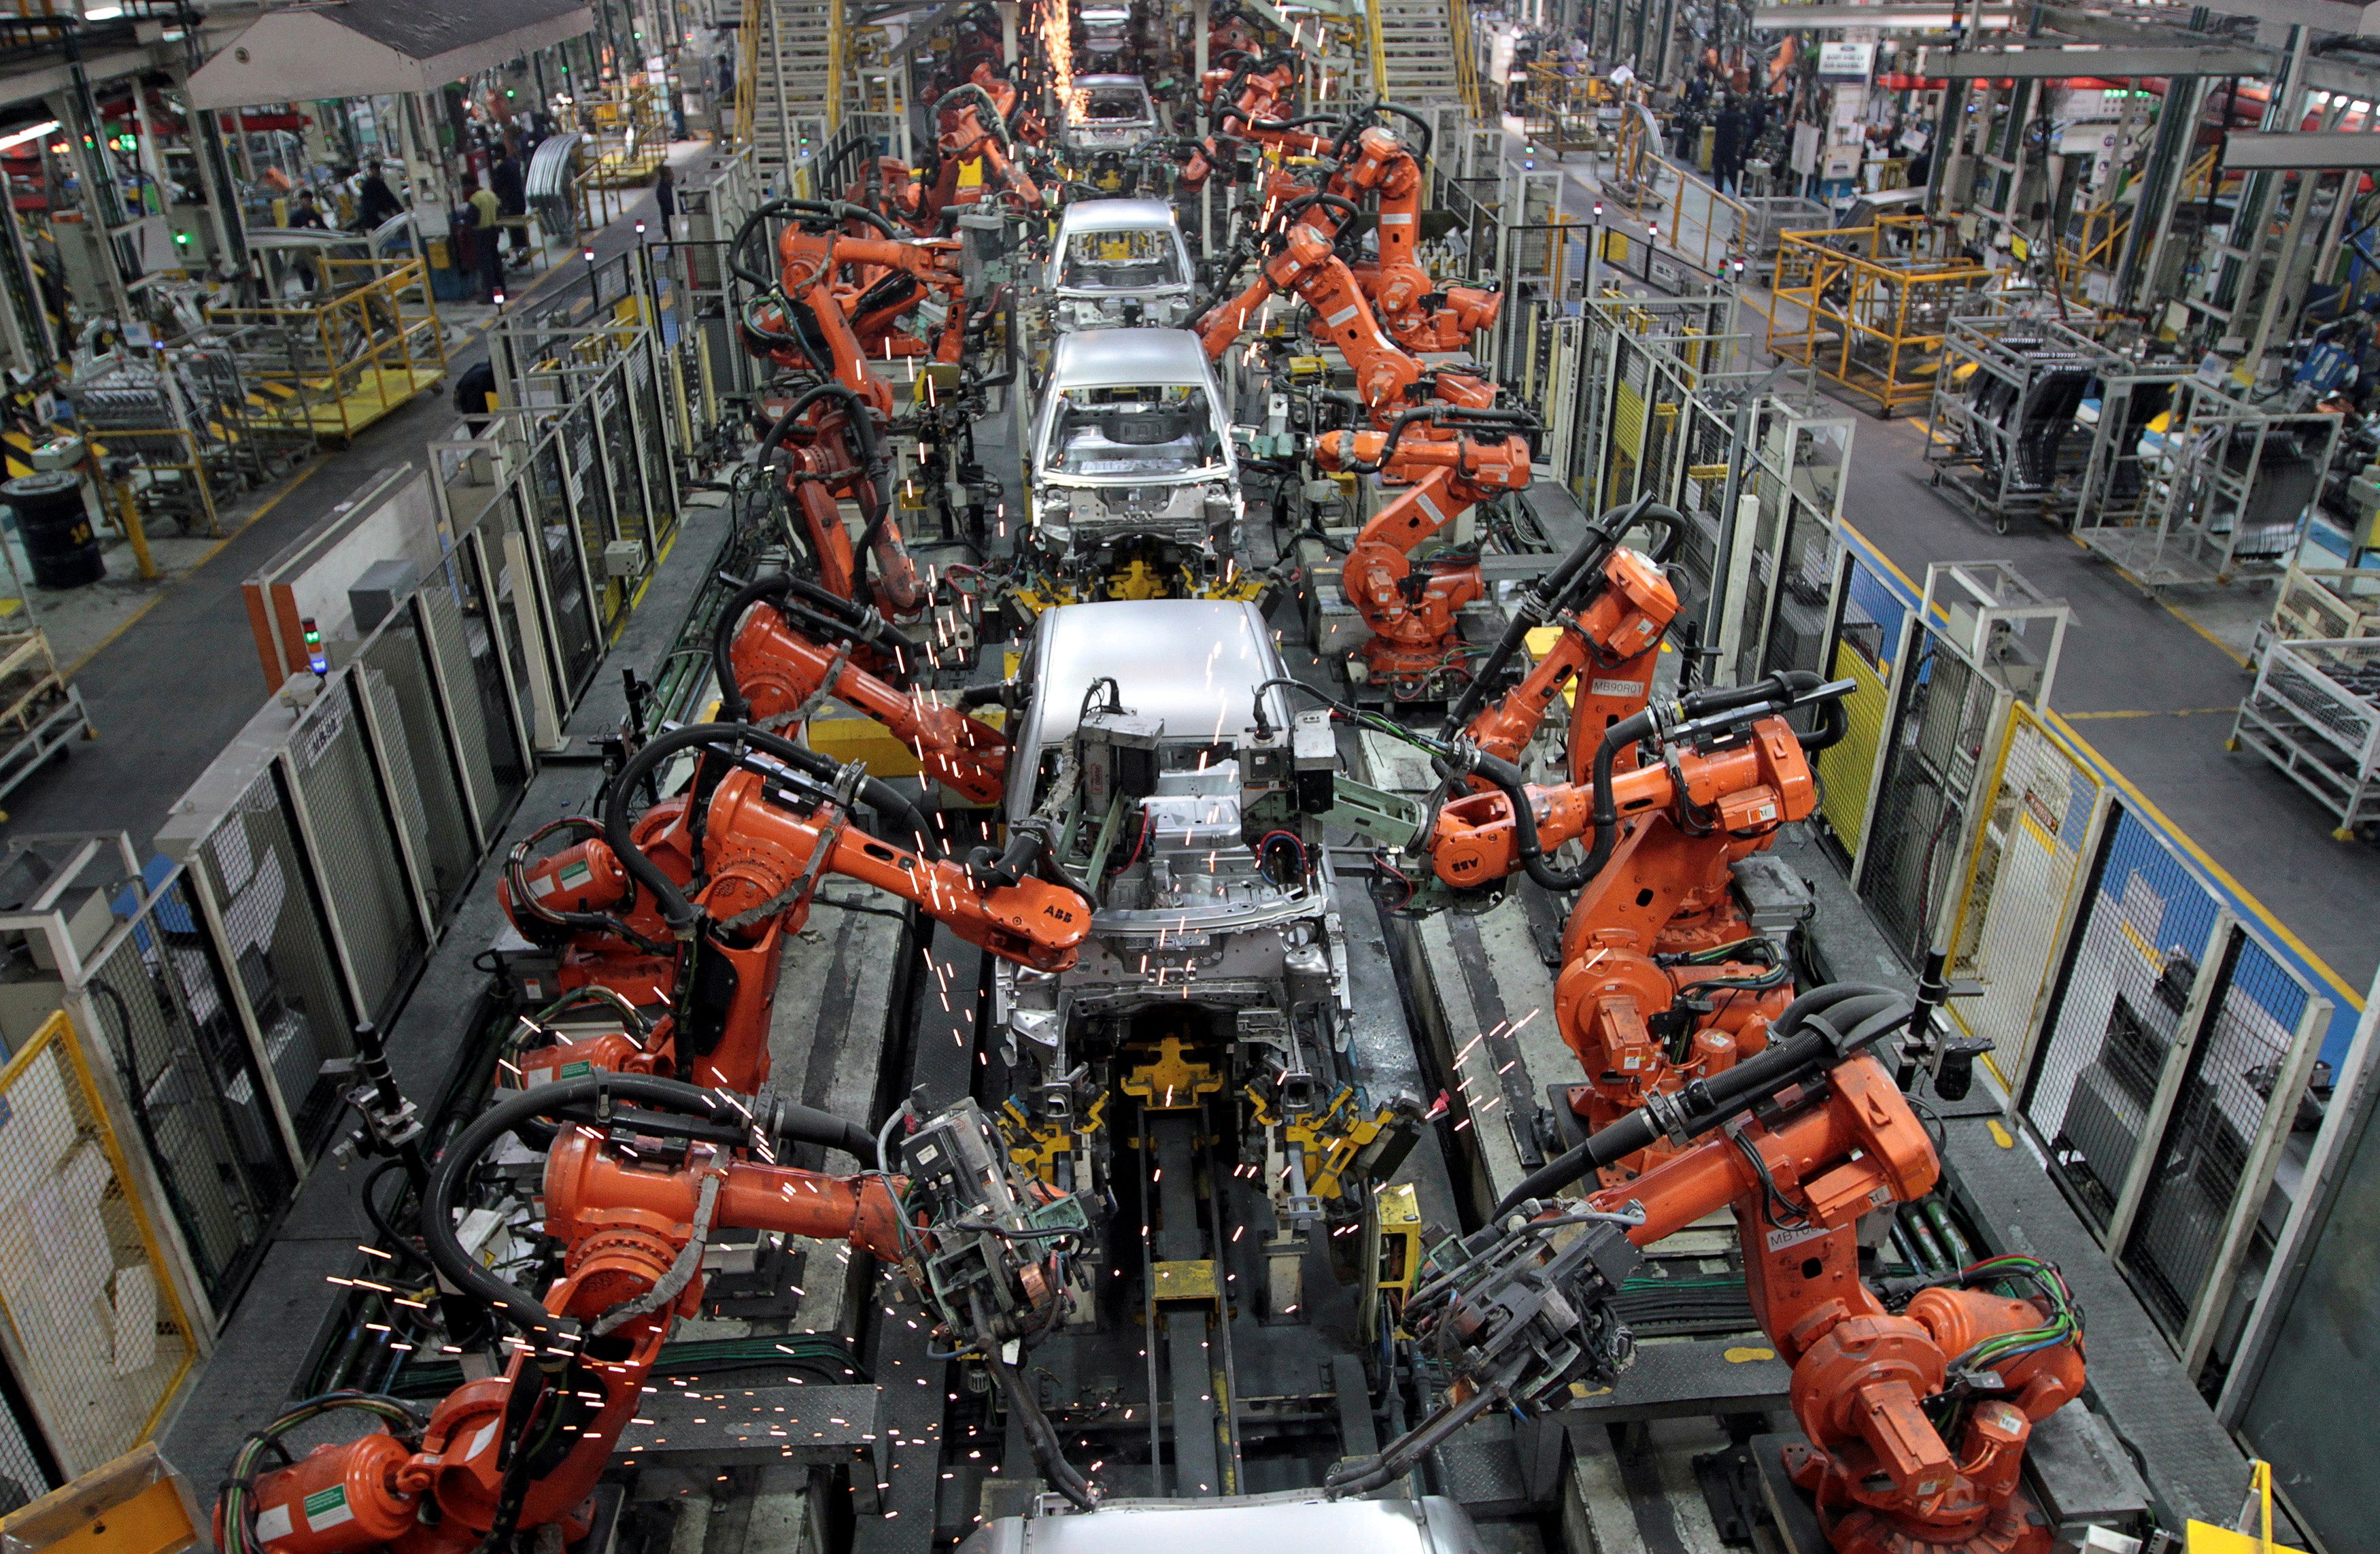 Ford cars are assembled at a plant of Ford India in Chengalpattu, on the outskirts of Chennai, India, March 5, 2012. REUTERS/Babu/File Photo